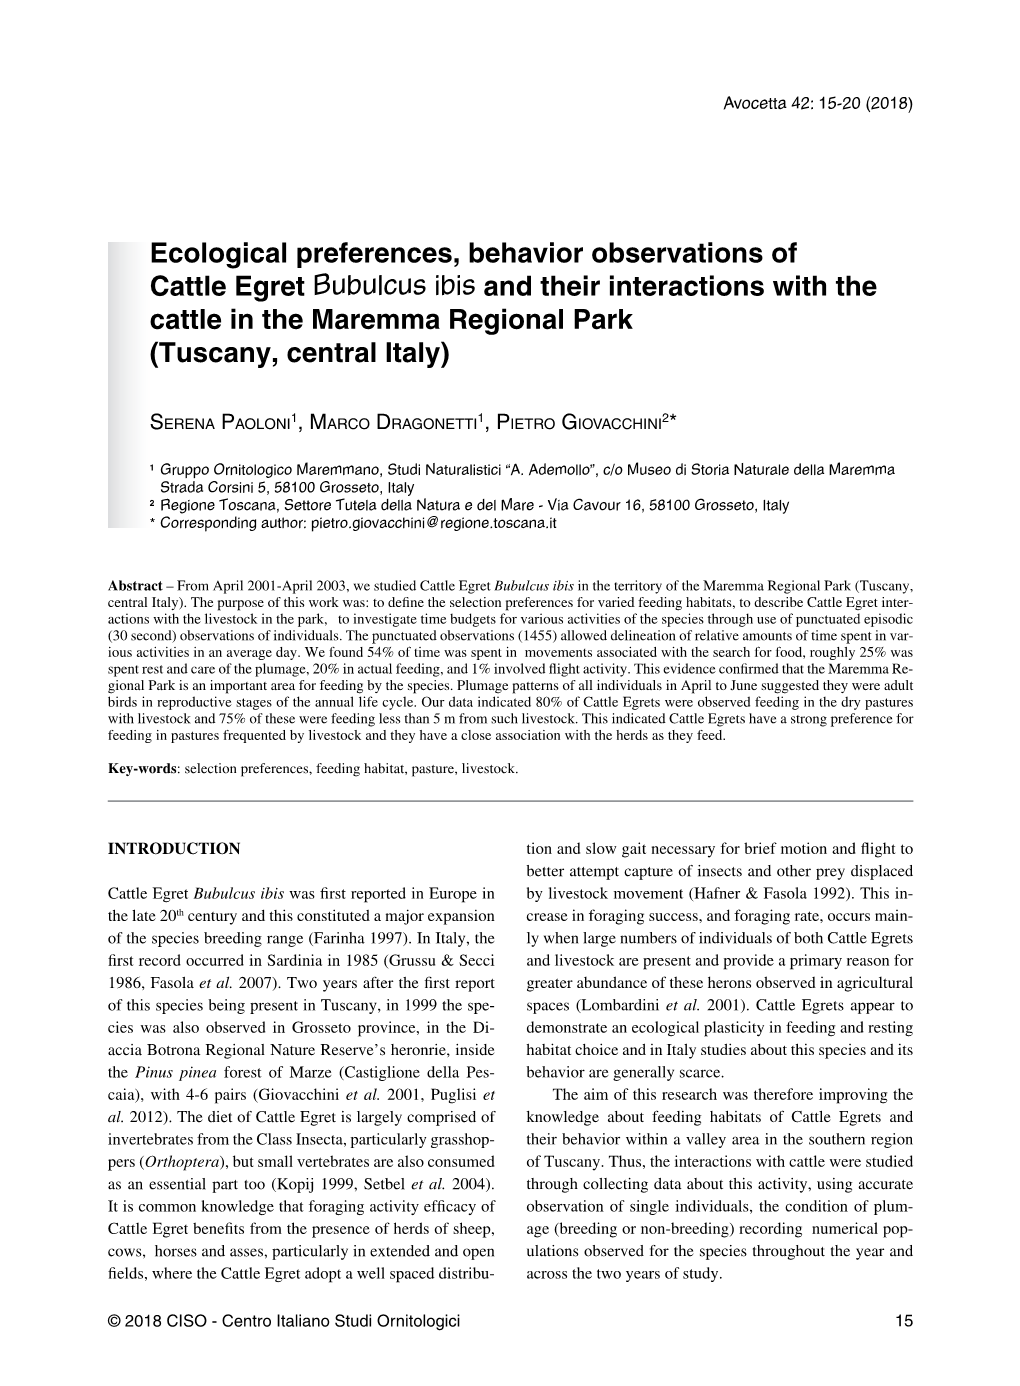 Ecological Preferences, Behavior Observations of Cattle Egret Bubulcus Ibis and Their Interactions with the Cattle in the Maremm